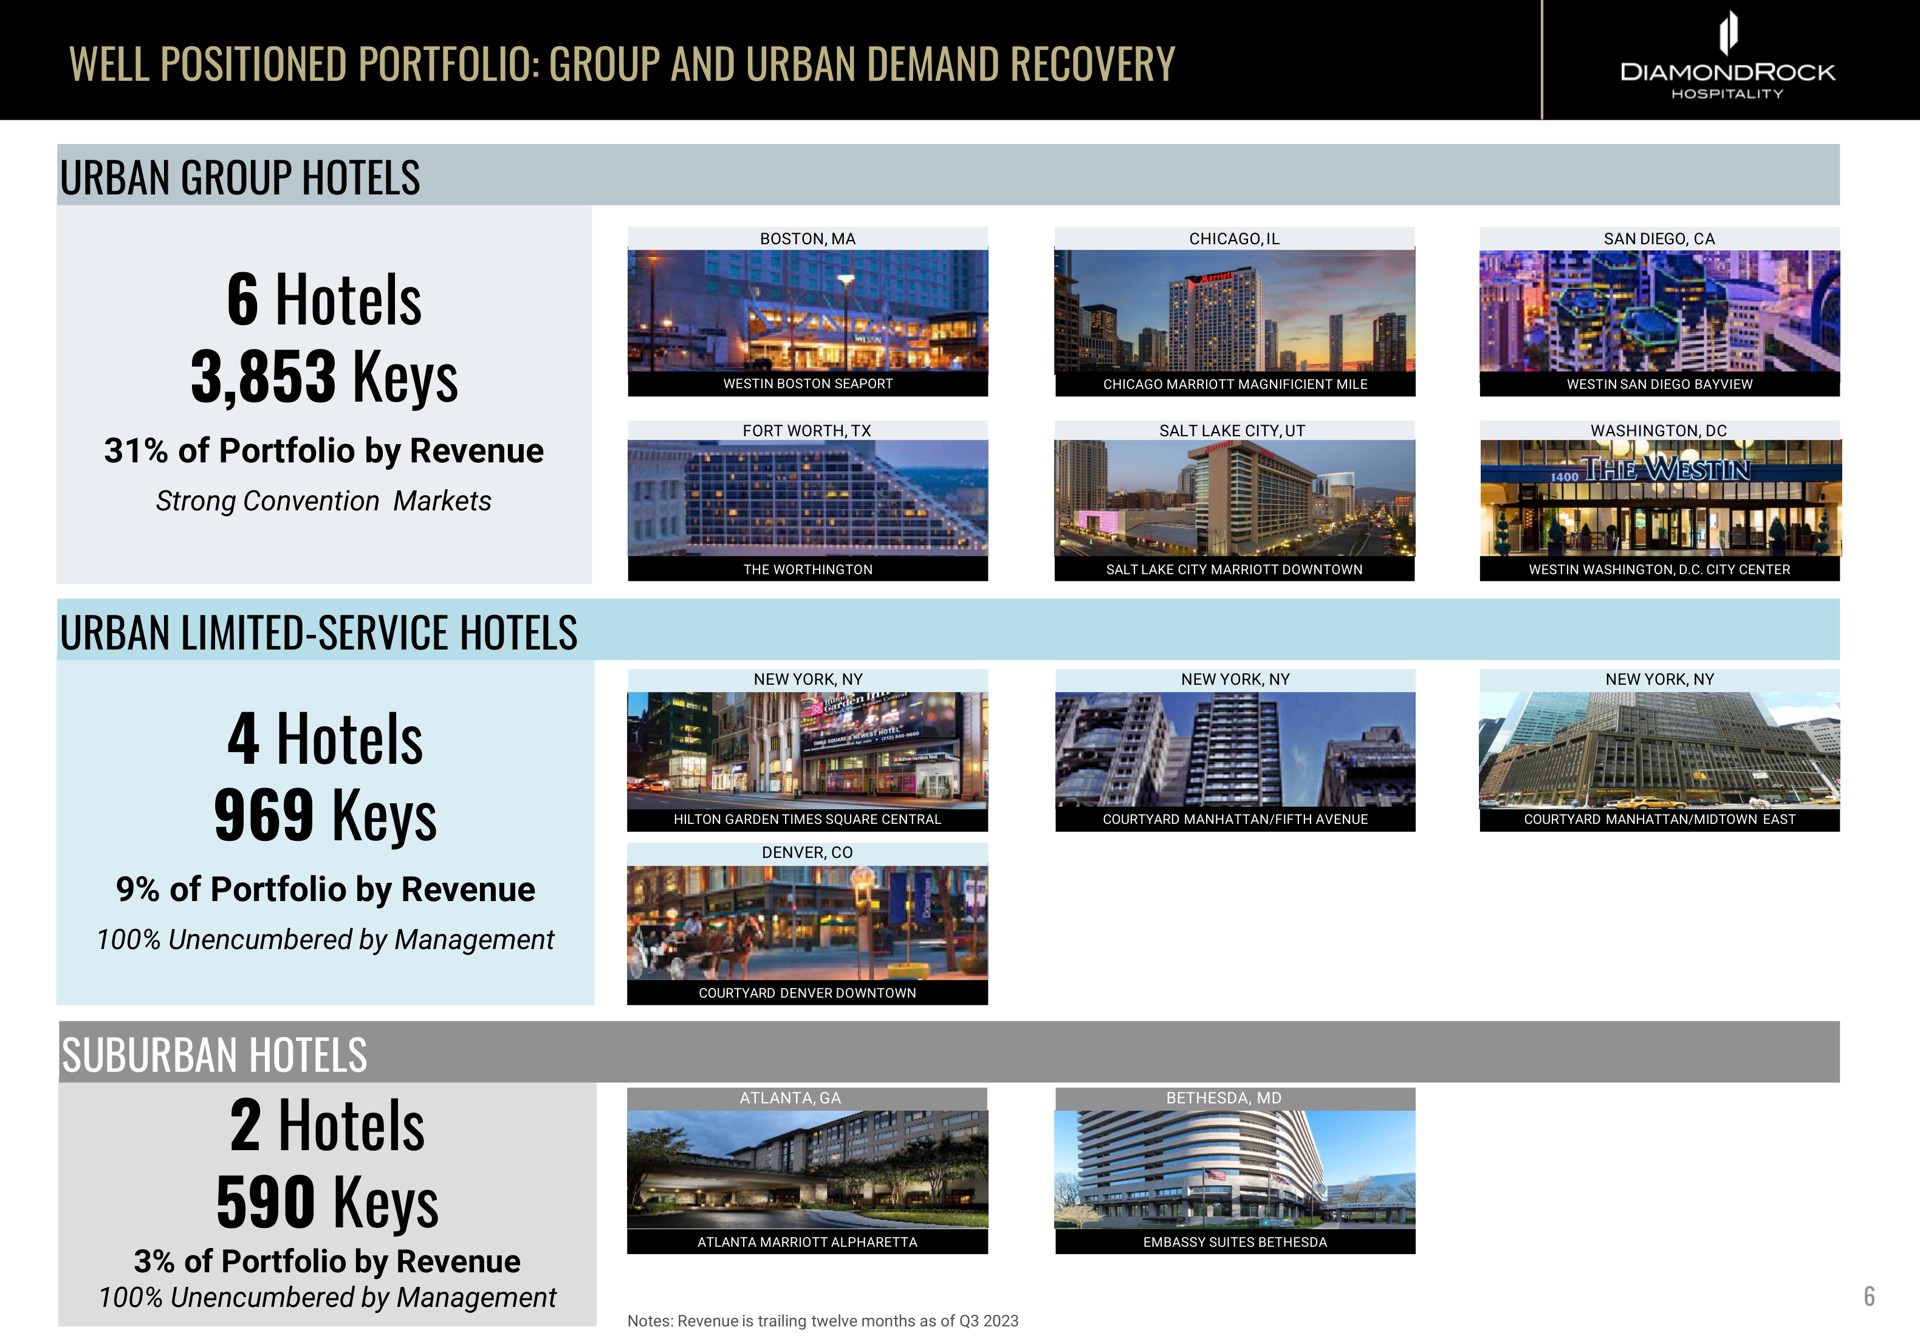 well positioned portfolio group and urban demand recovery urban group hotels hotels keys of portfolio by revenue urban limited service hotels hotels keys of portfolio by revenue suburban hotels hotels keys trout otto rea eel cise a a | DiamondRock Hospitality